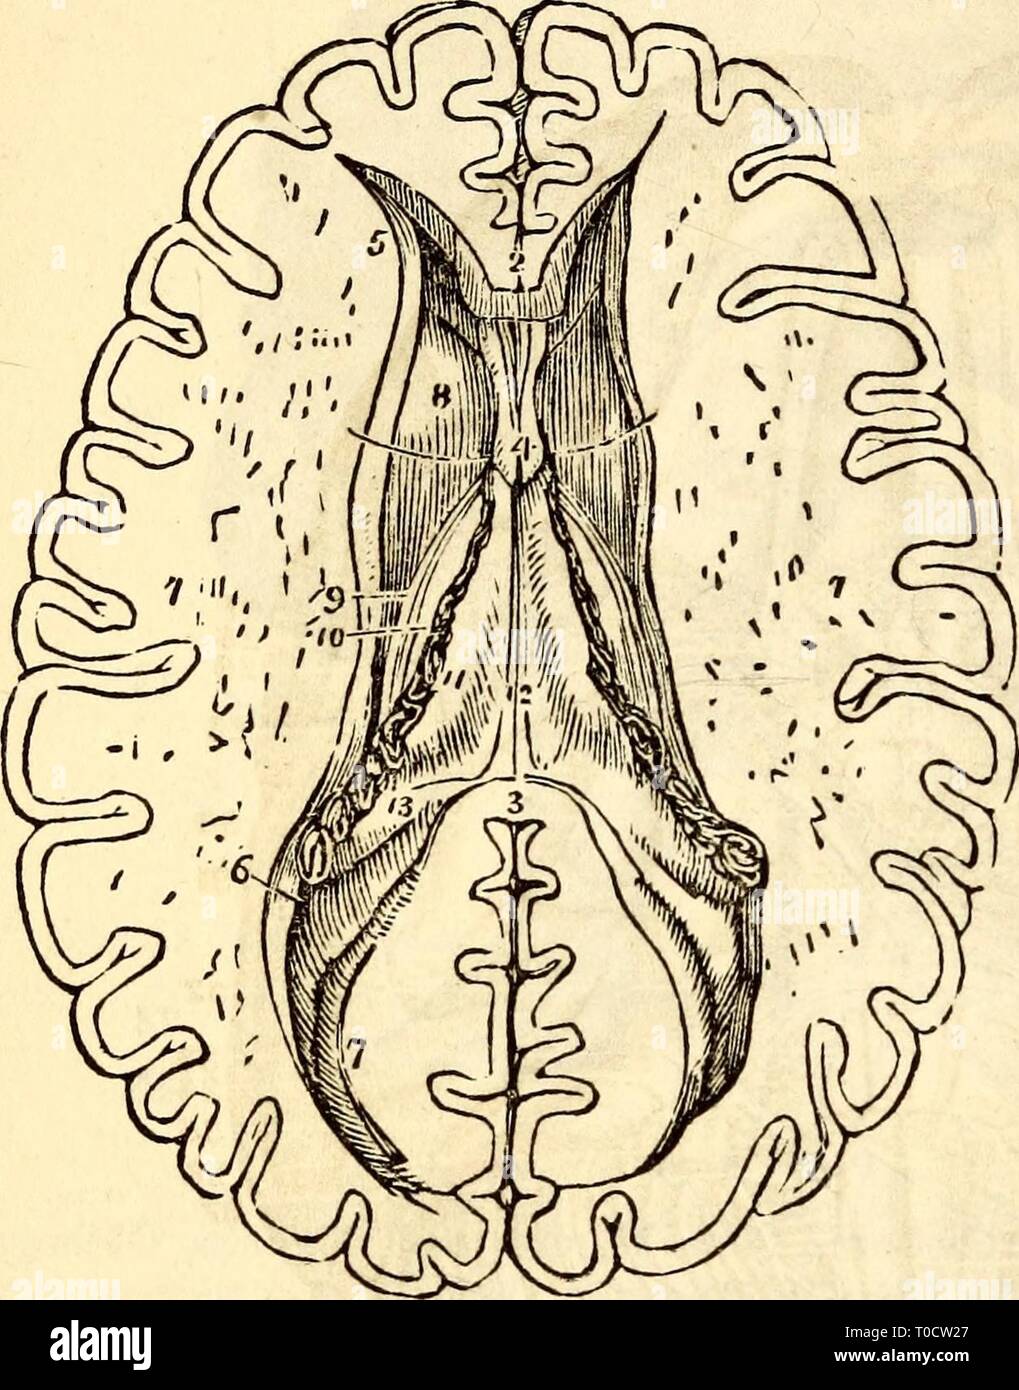 Elementary anatomy and physiology  Elementary anatomy and physiology : for colleges, academies, and other schools elementaryanato00hitc Year: 1869  o A View of the Interior Surface of the Cerebellum and a Portion of the Medulla Ob- longata. 1, 1, The Circumference of the Cerebellum. 2, 2, The two Hemispheres of the Cerebellum. 3, Lobulus Amygdaloidcs. 4, The Vermis Inferior. 5, Lobulus Nervi Pneumogastriel. C, The Calamus Scriptorius. 7, Its Point. 8, Section of the Medulla Oblongata. 9, Points to the Origin of the Pneumogastric Nerve. Fig. 305. Stock Photo